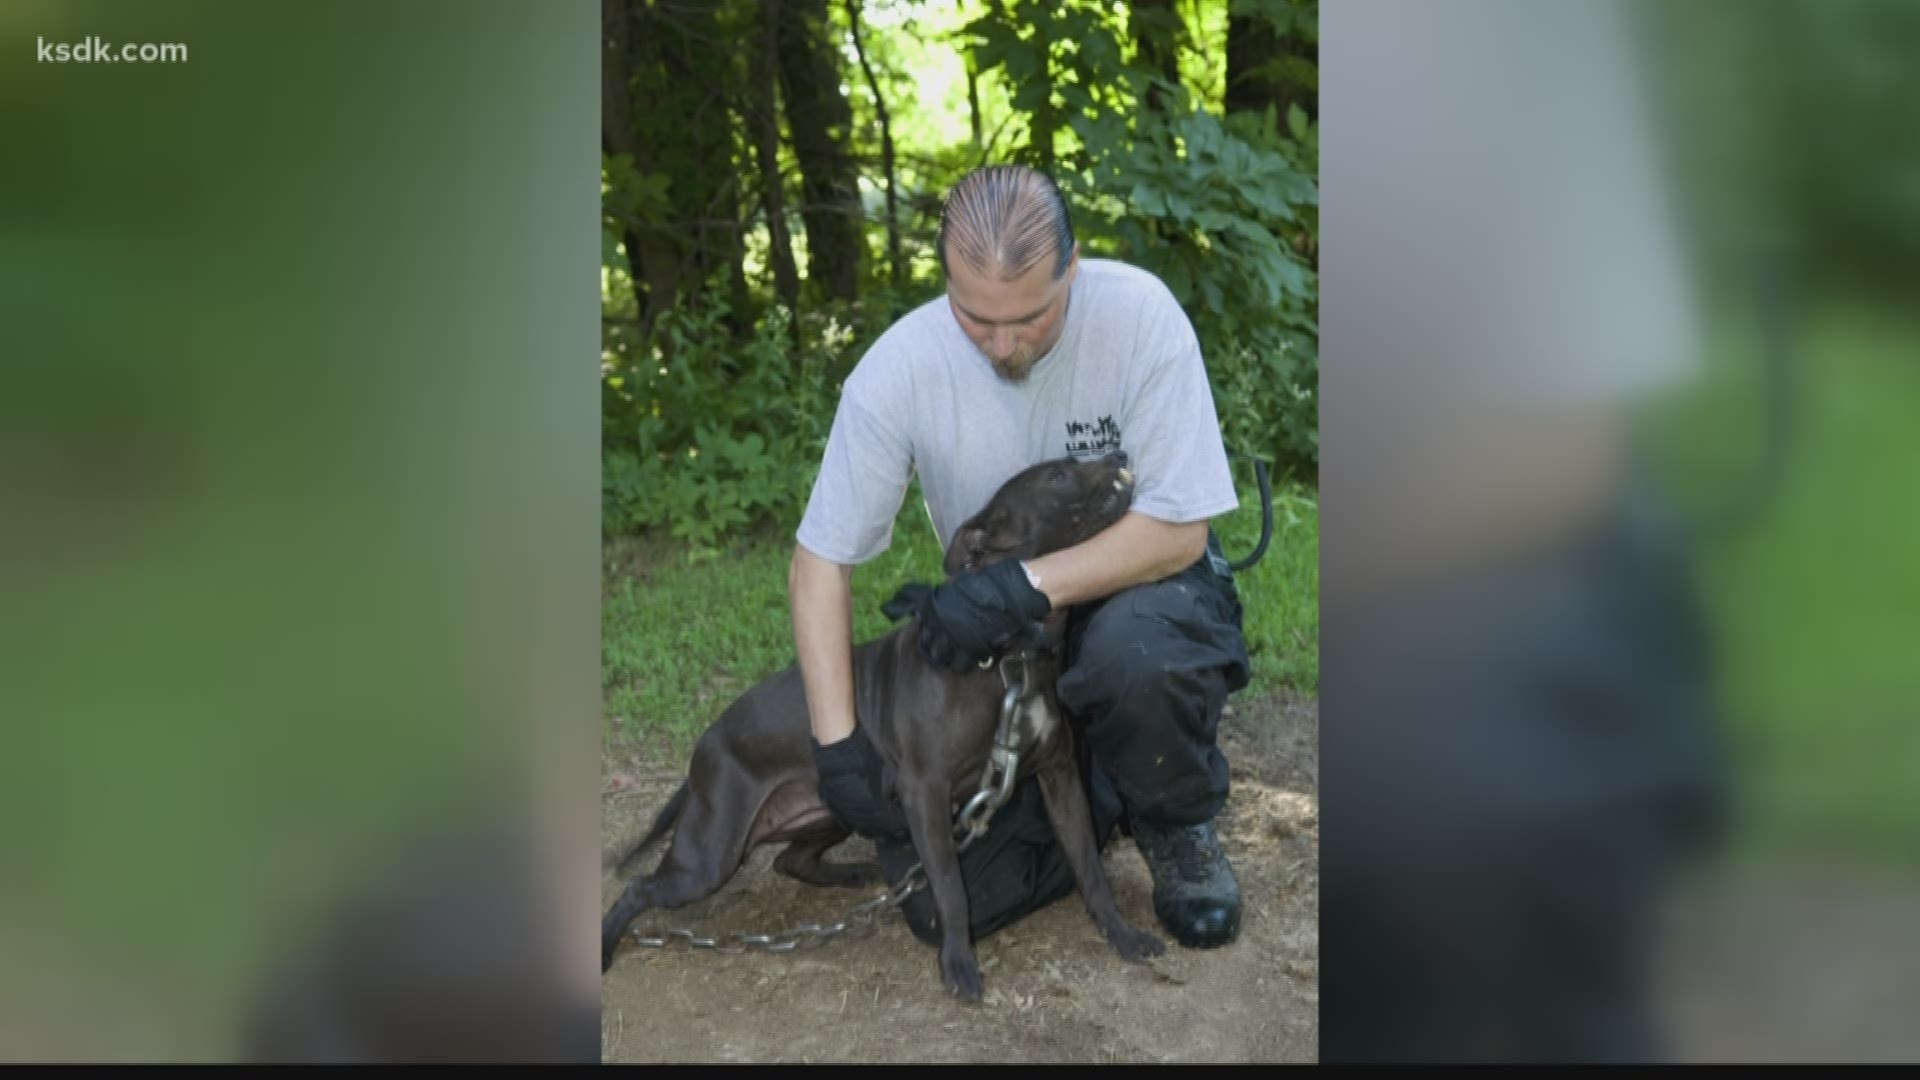 No one knows the horrors of dog fighting better than the photographer who tags along with the Humane Society of Missouri when they break up the rings. He continues to share his stories and photos in hopes of putting an end to the culture of animal cruelty.